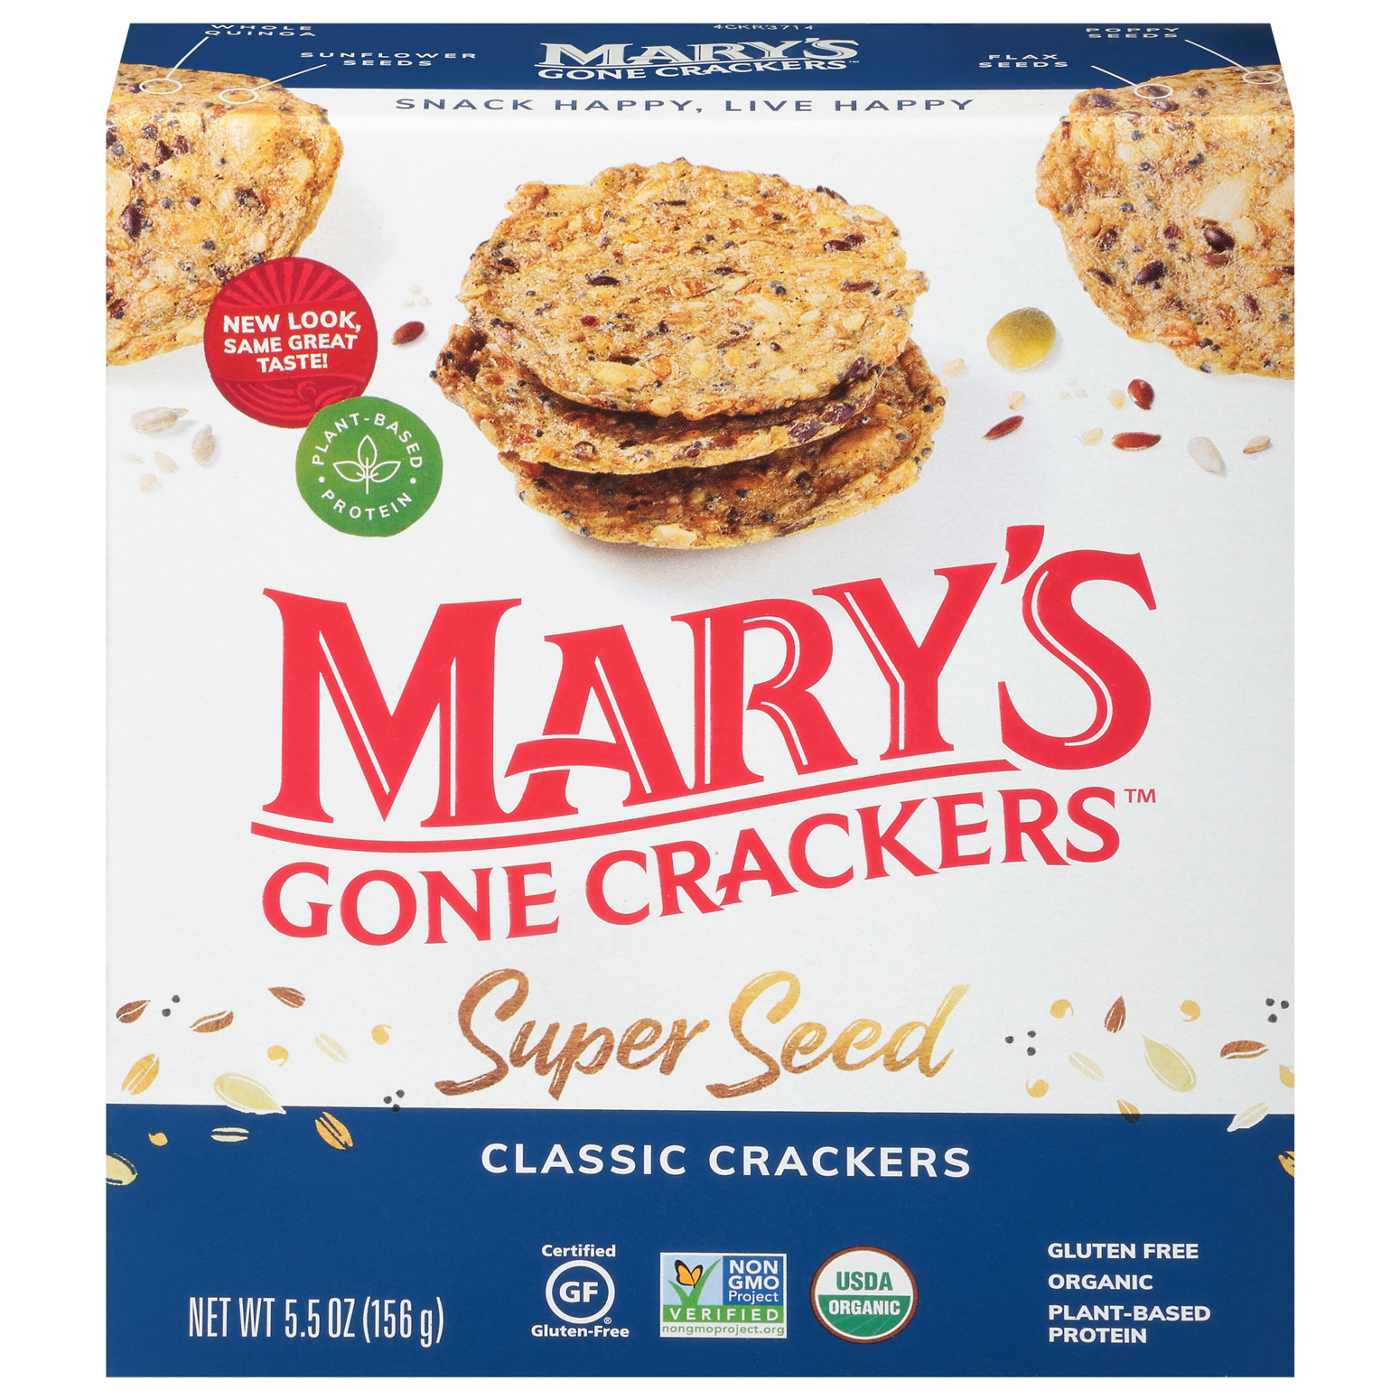 Mary's Gone Crackers Gluten Free Super Seed Crackers; image 1 of 2